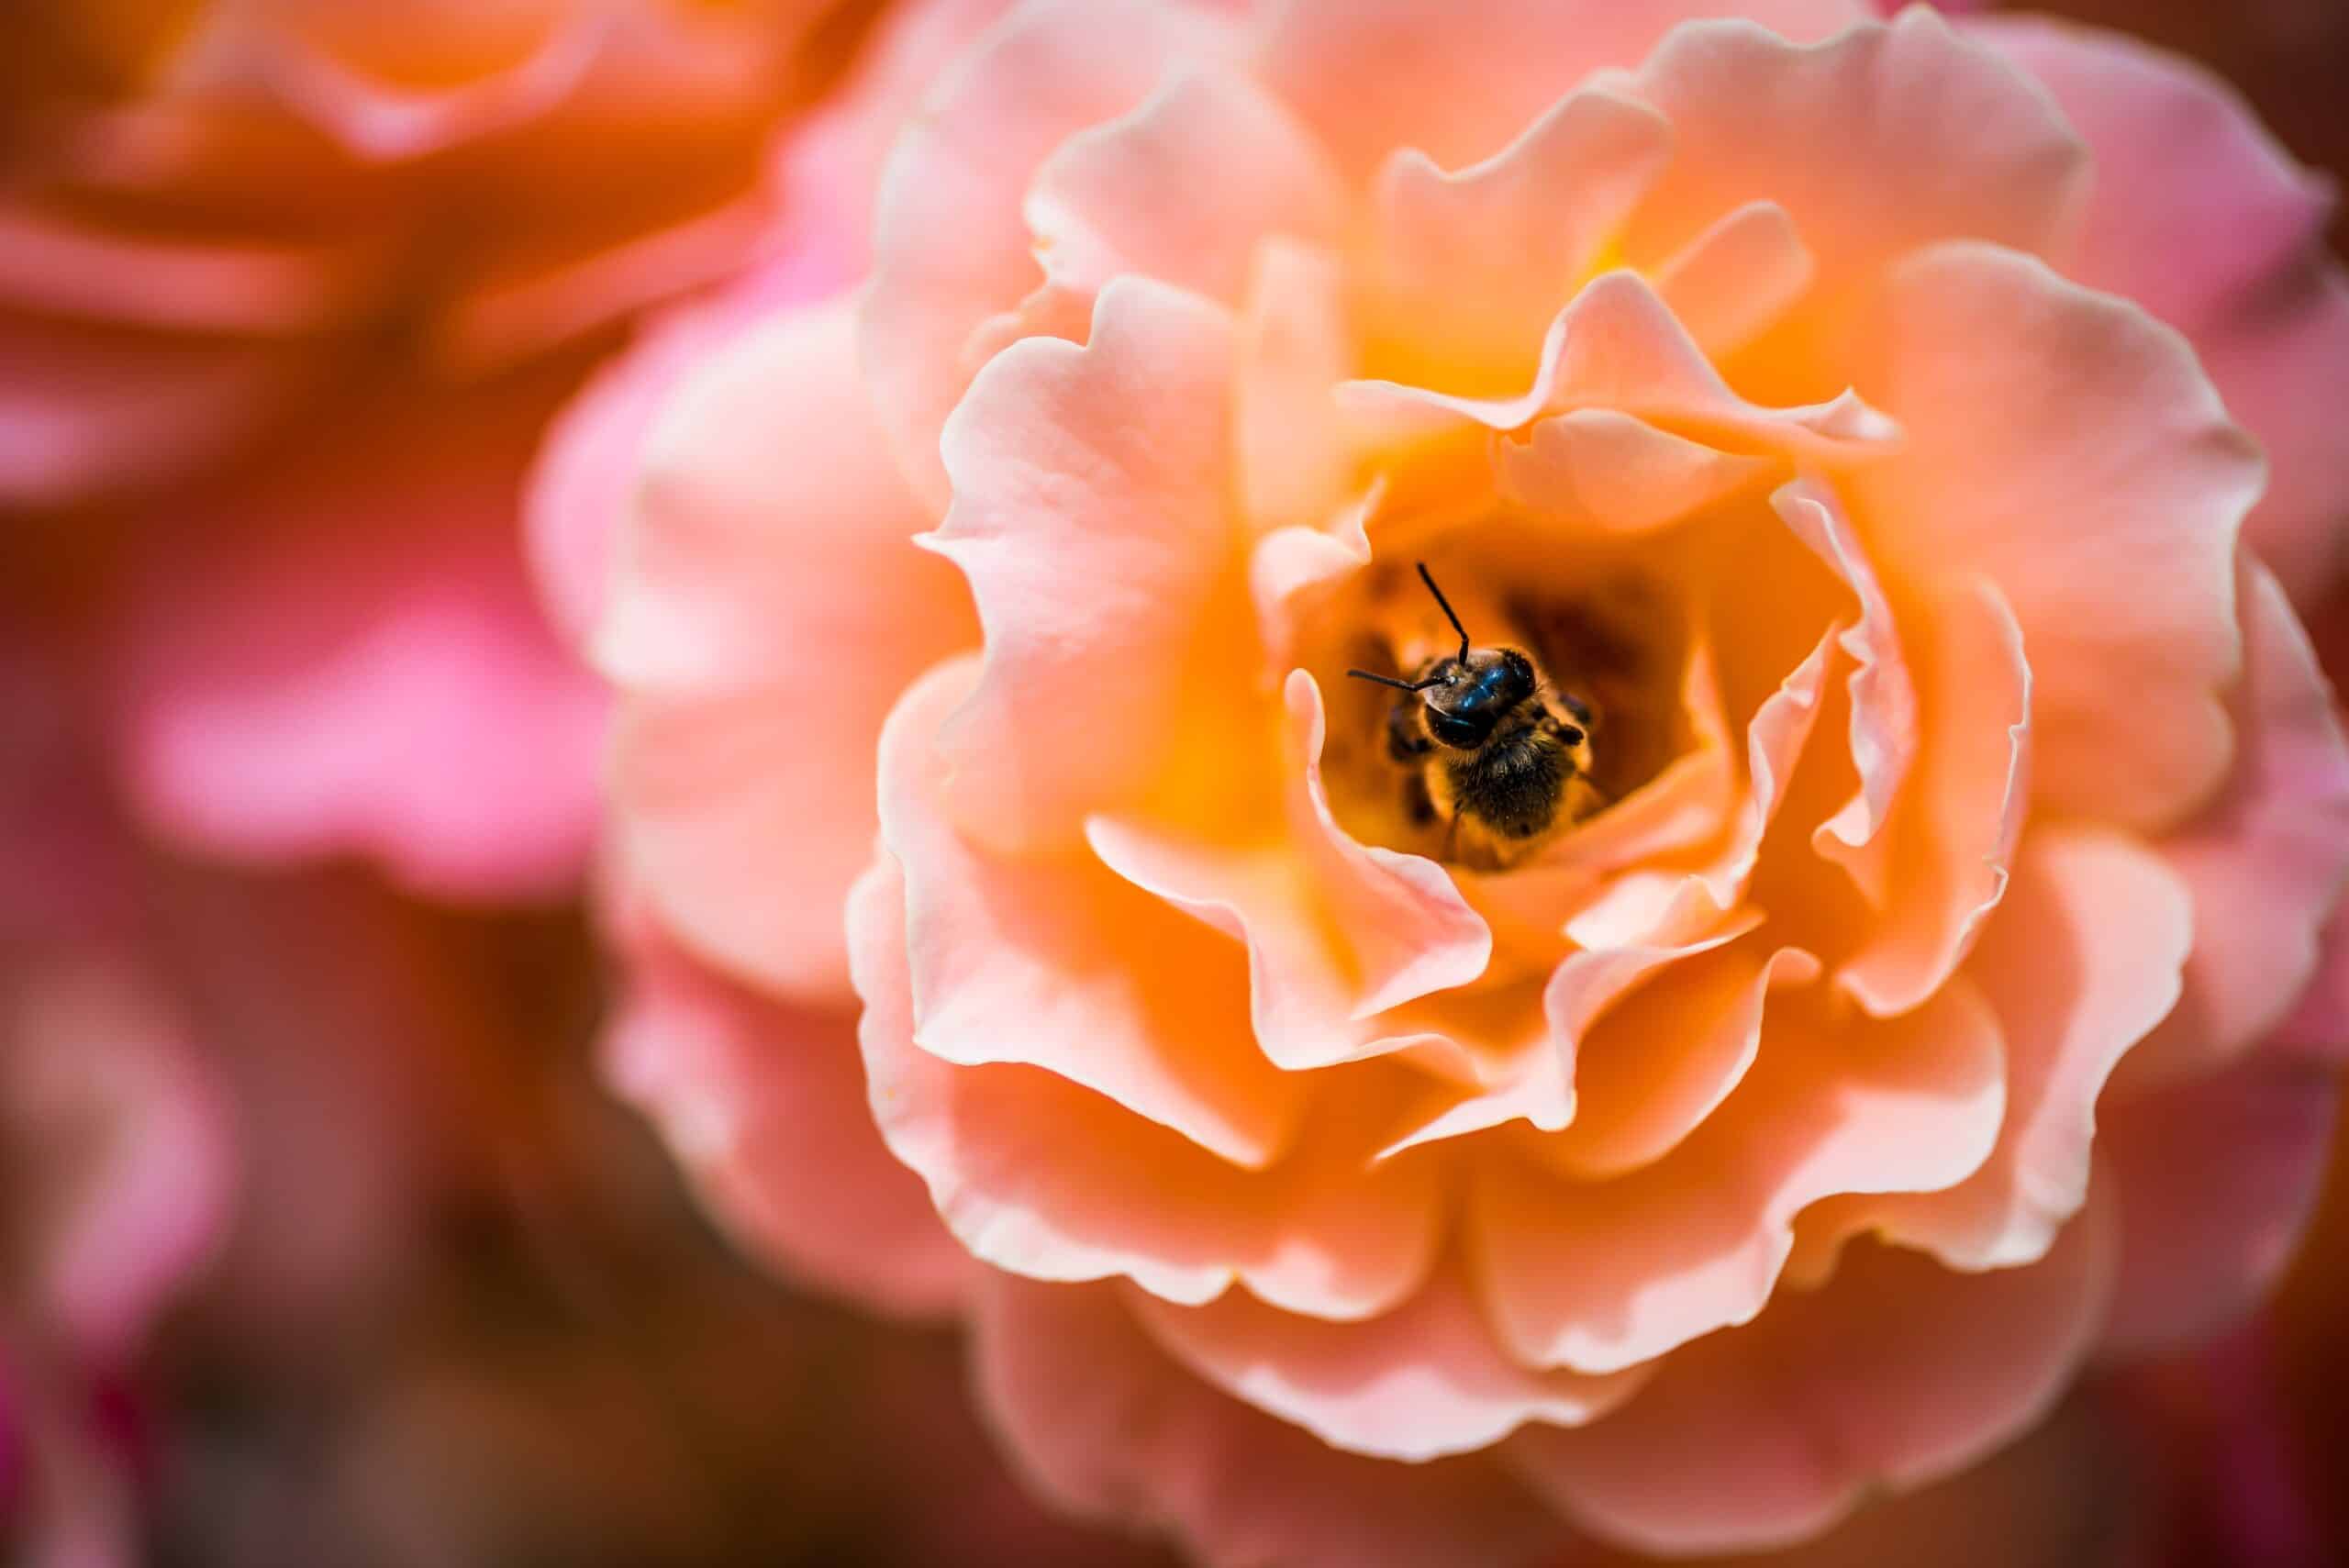 How to Attract Bees with Flowers